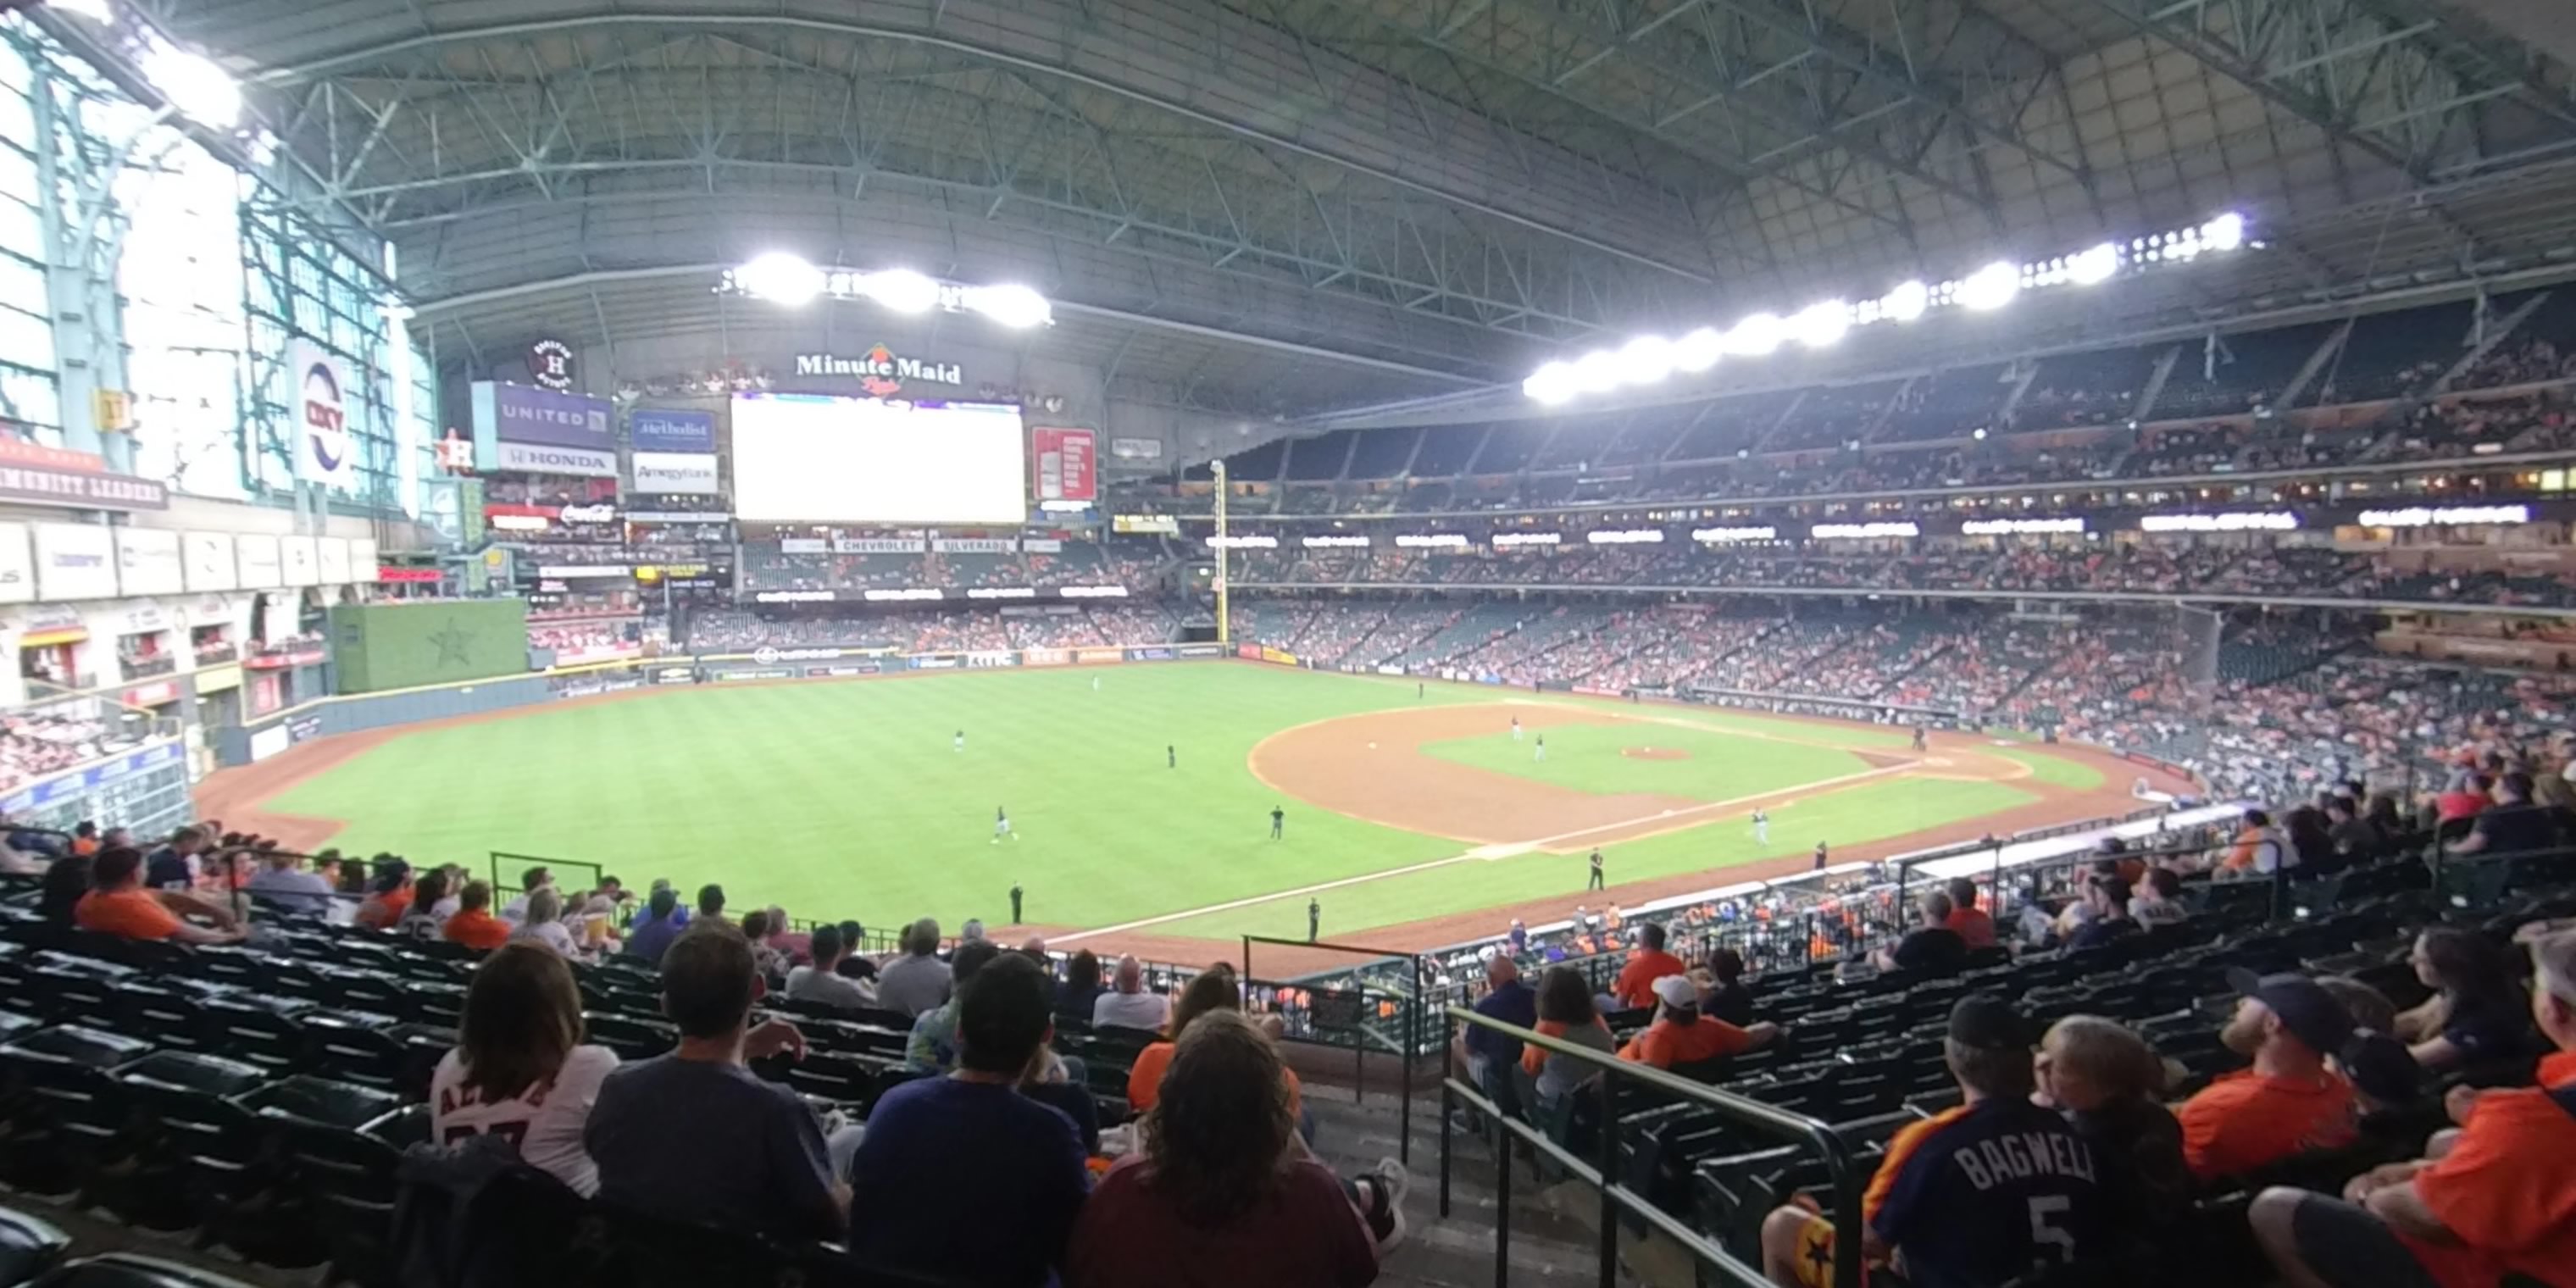 Section 208 at Minute Maid Park 